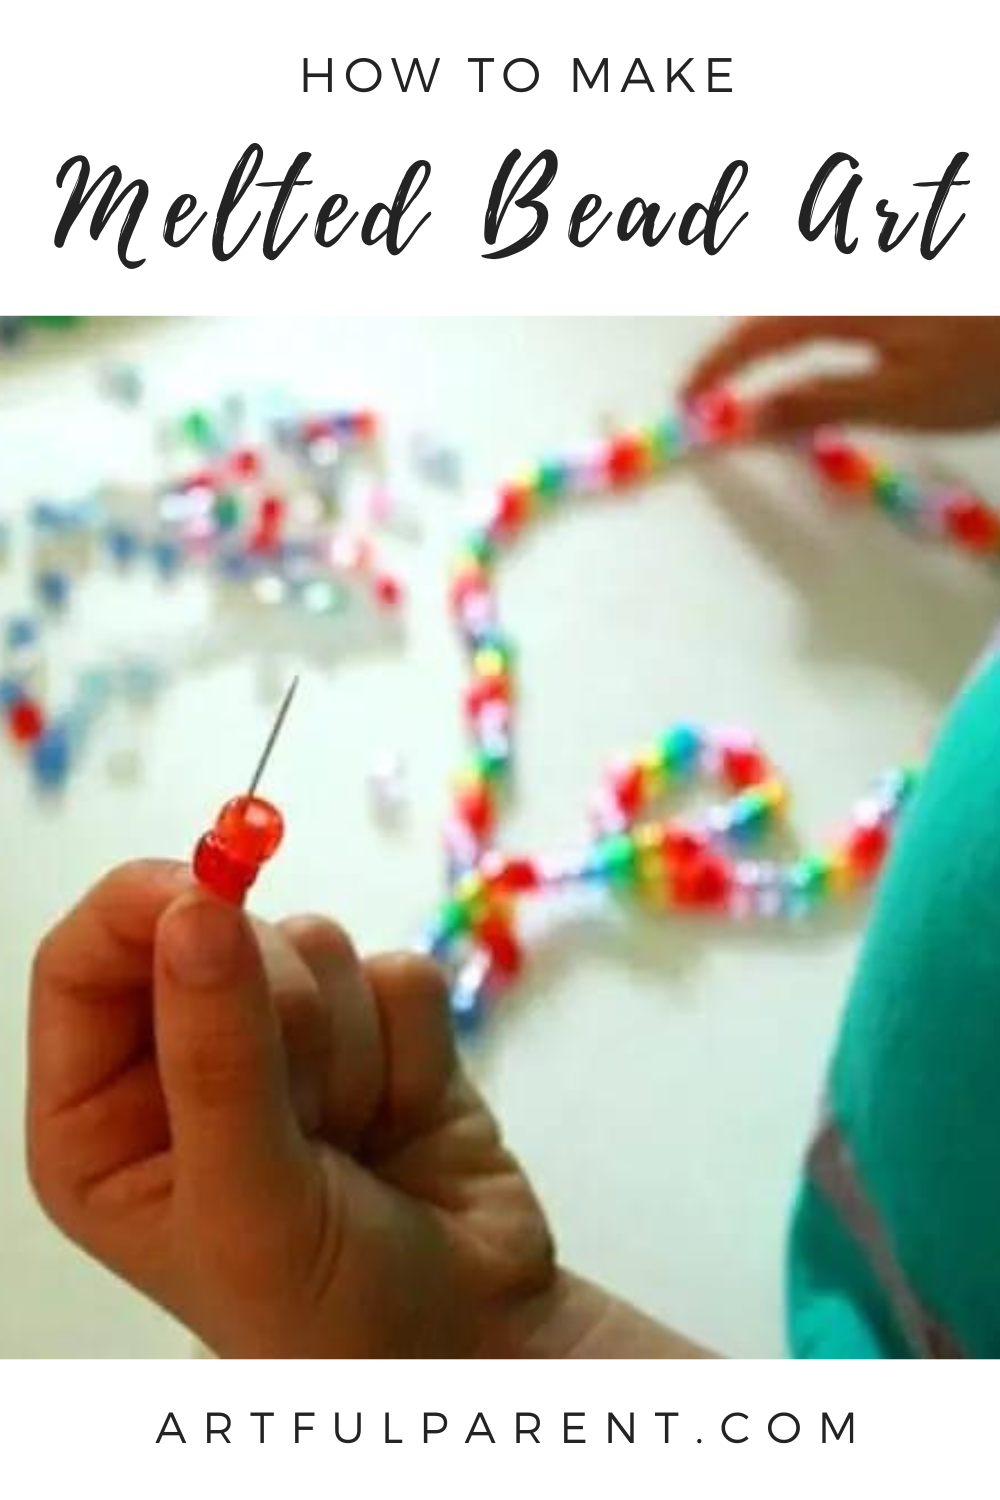 How to Make Melted Bead Art